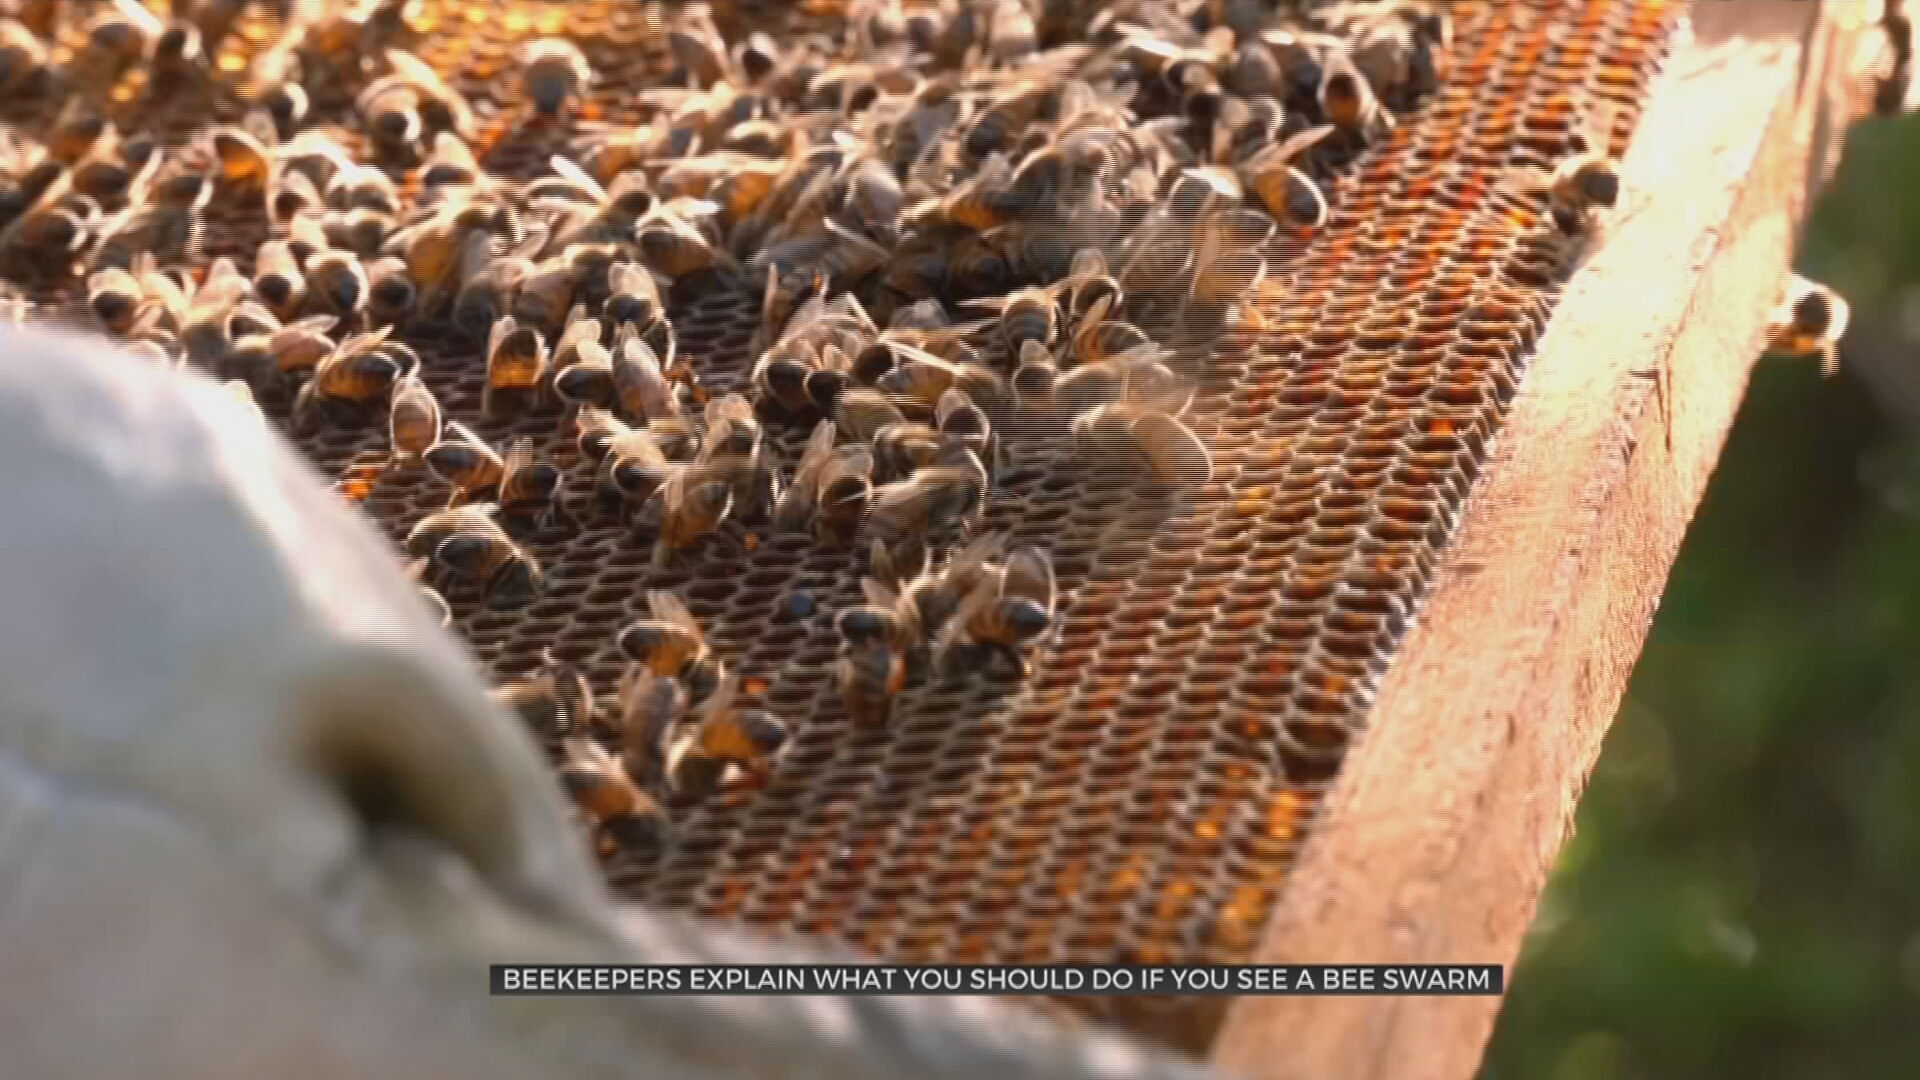 Oklahoma Beekeepers Explain What To Do If You See A Bee Swarm 